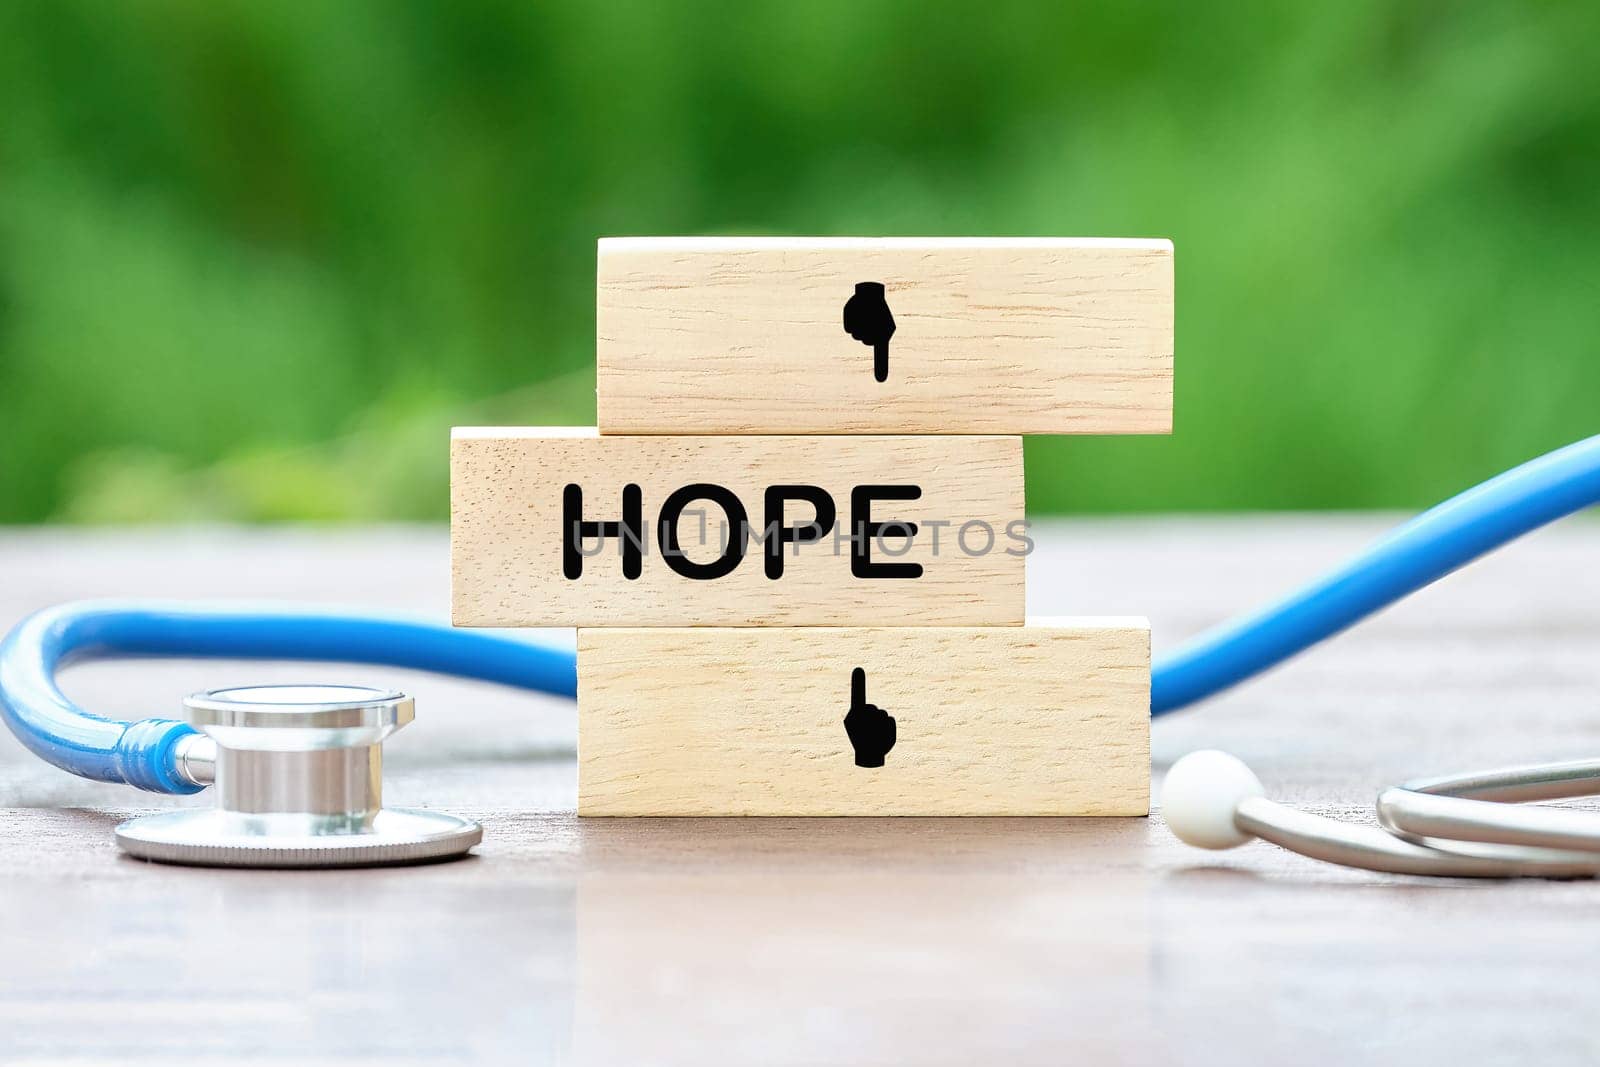 HOPE text on wooden blocks on a green background